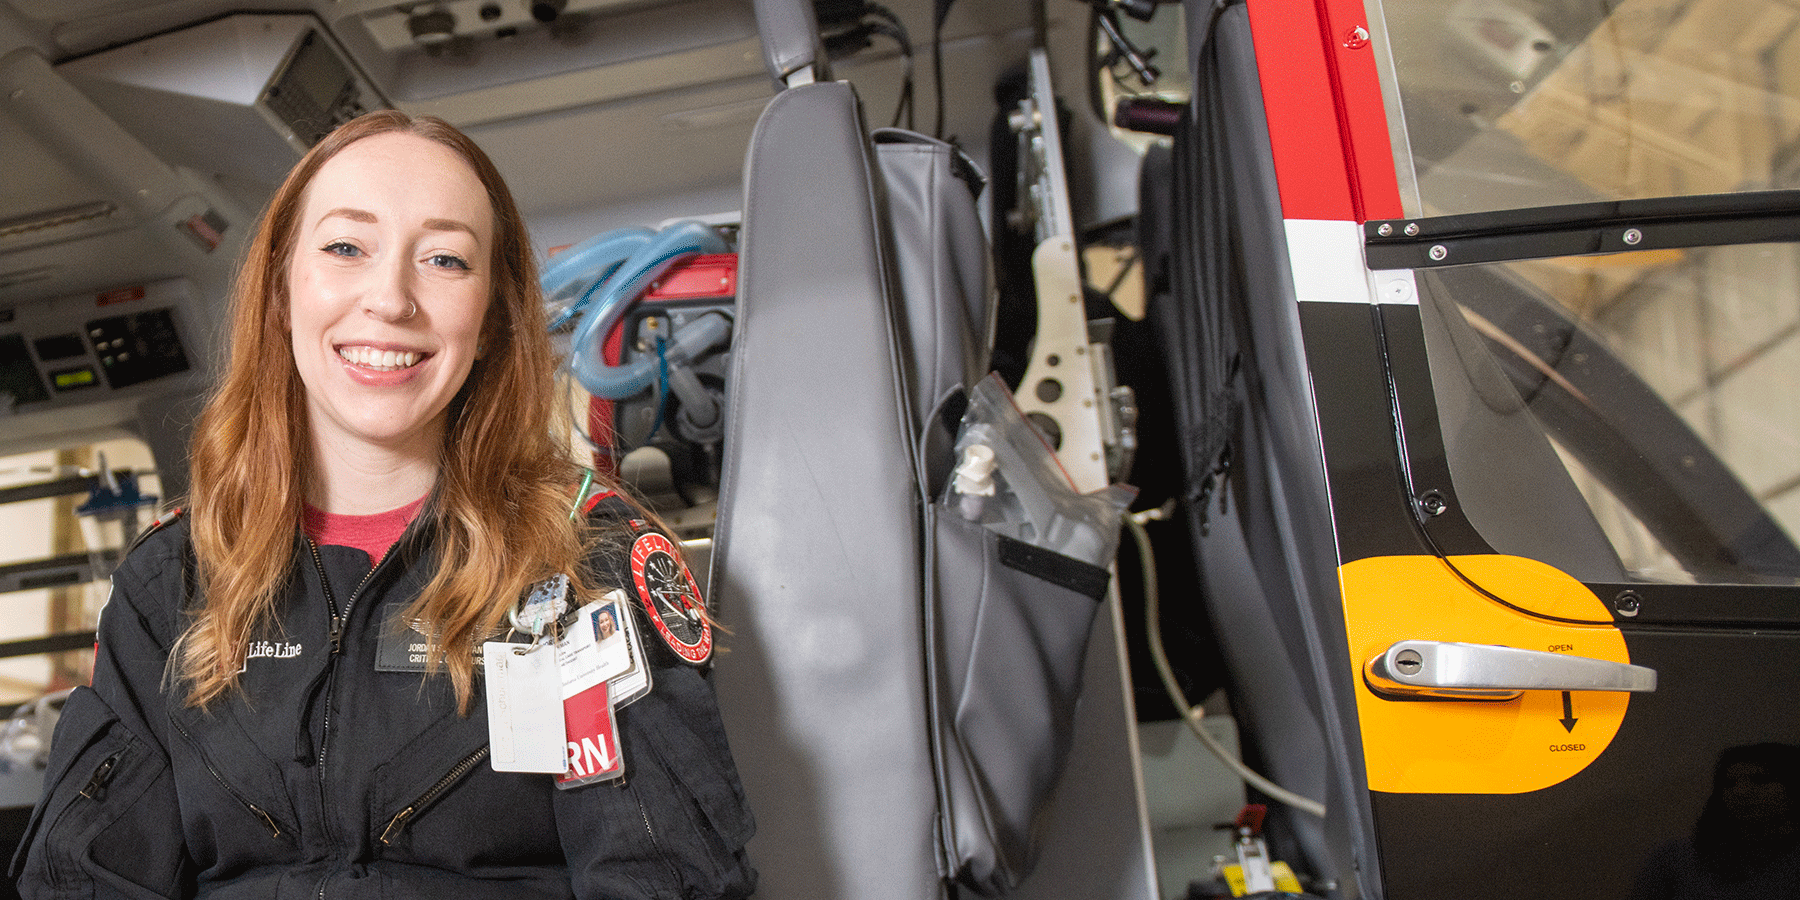 A white female student poses in an emergency services LifeLine vehicle. She has long red hair, a nose ring, and she wears a back LifeLine uniform with a red undershirt. A badge is on her chest. Medical devices and equipment are in the vehicle.